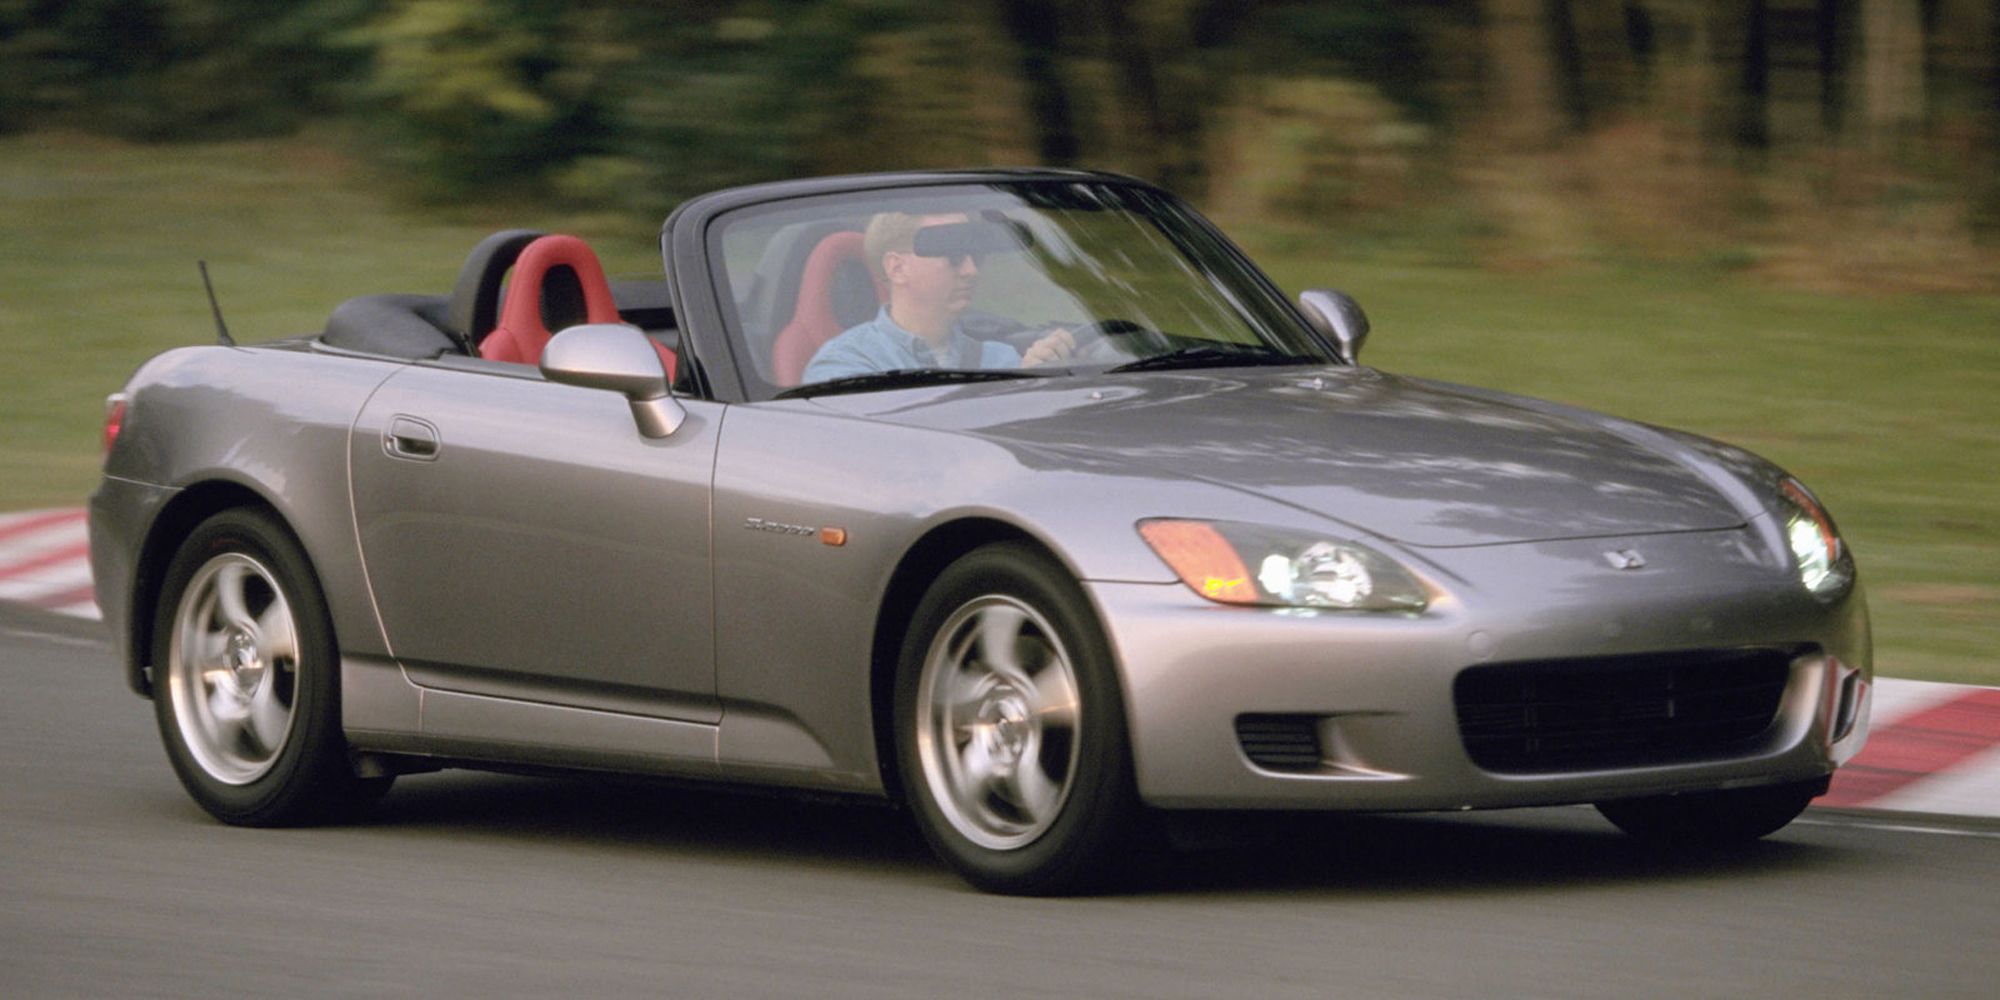 Front 3/4 view of the S2000 on the move